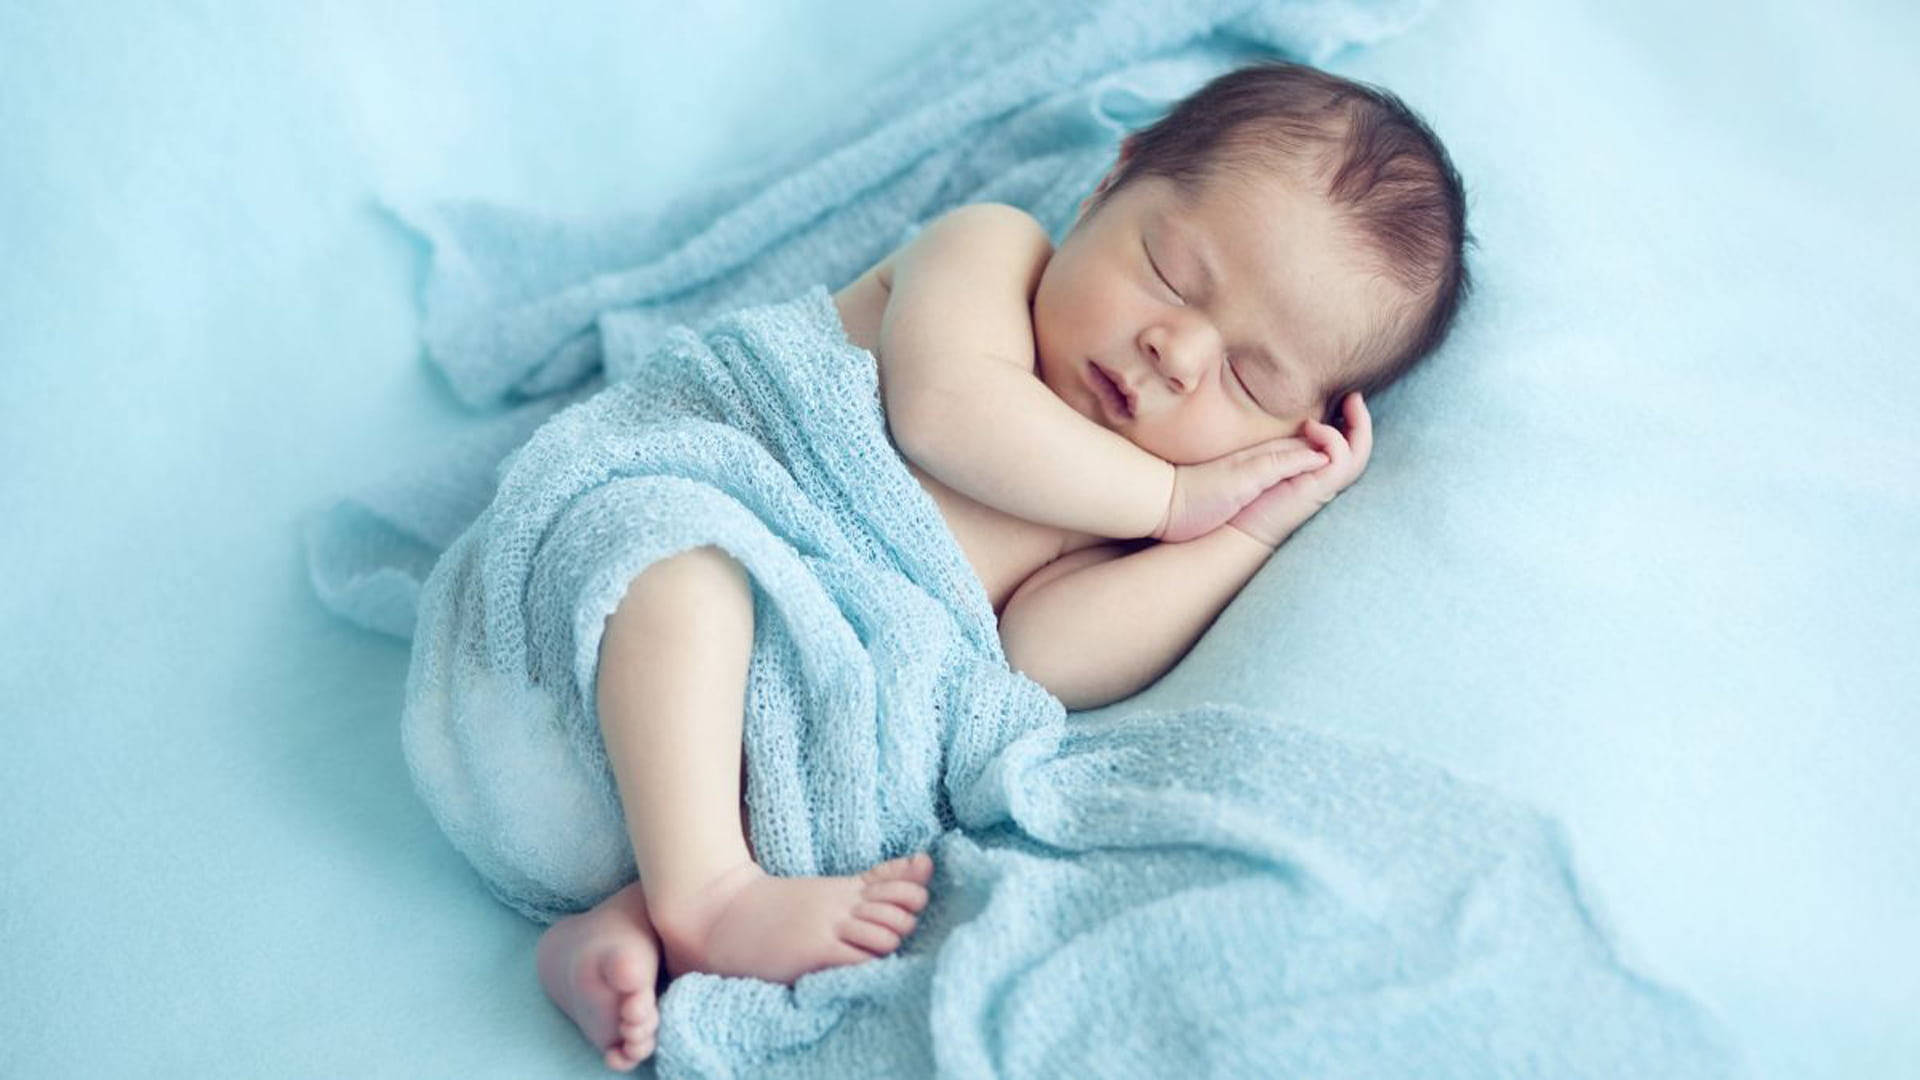 Very Cute Baby With Blue Blanket Background